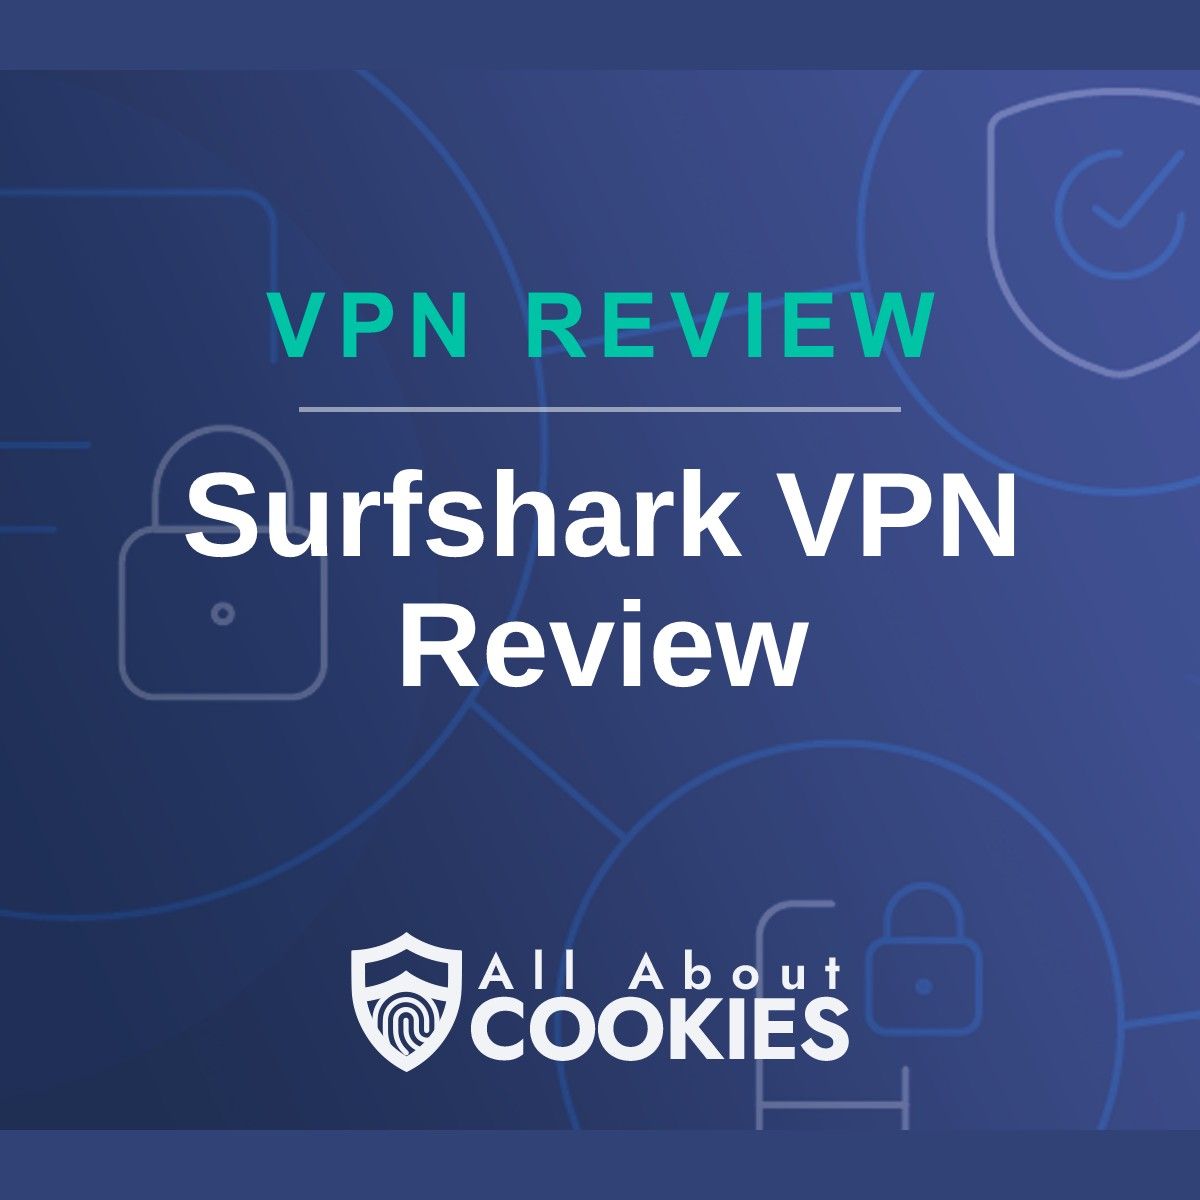 A blue background with images of locks and shields with the text &quot;Surfshark VPN Review&quot; and the All About Cookies logo. 